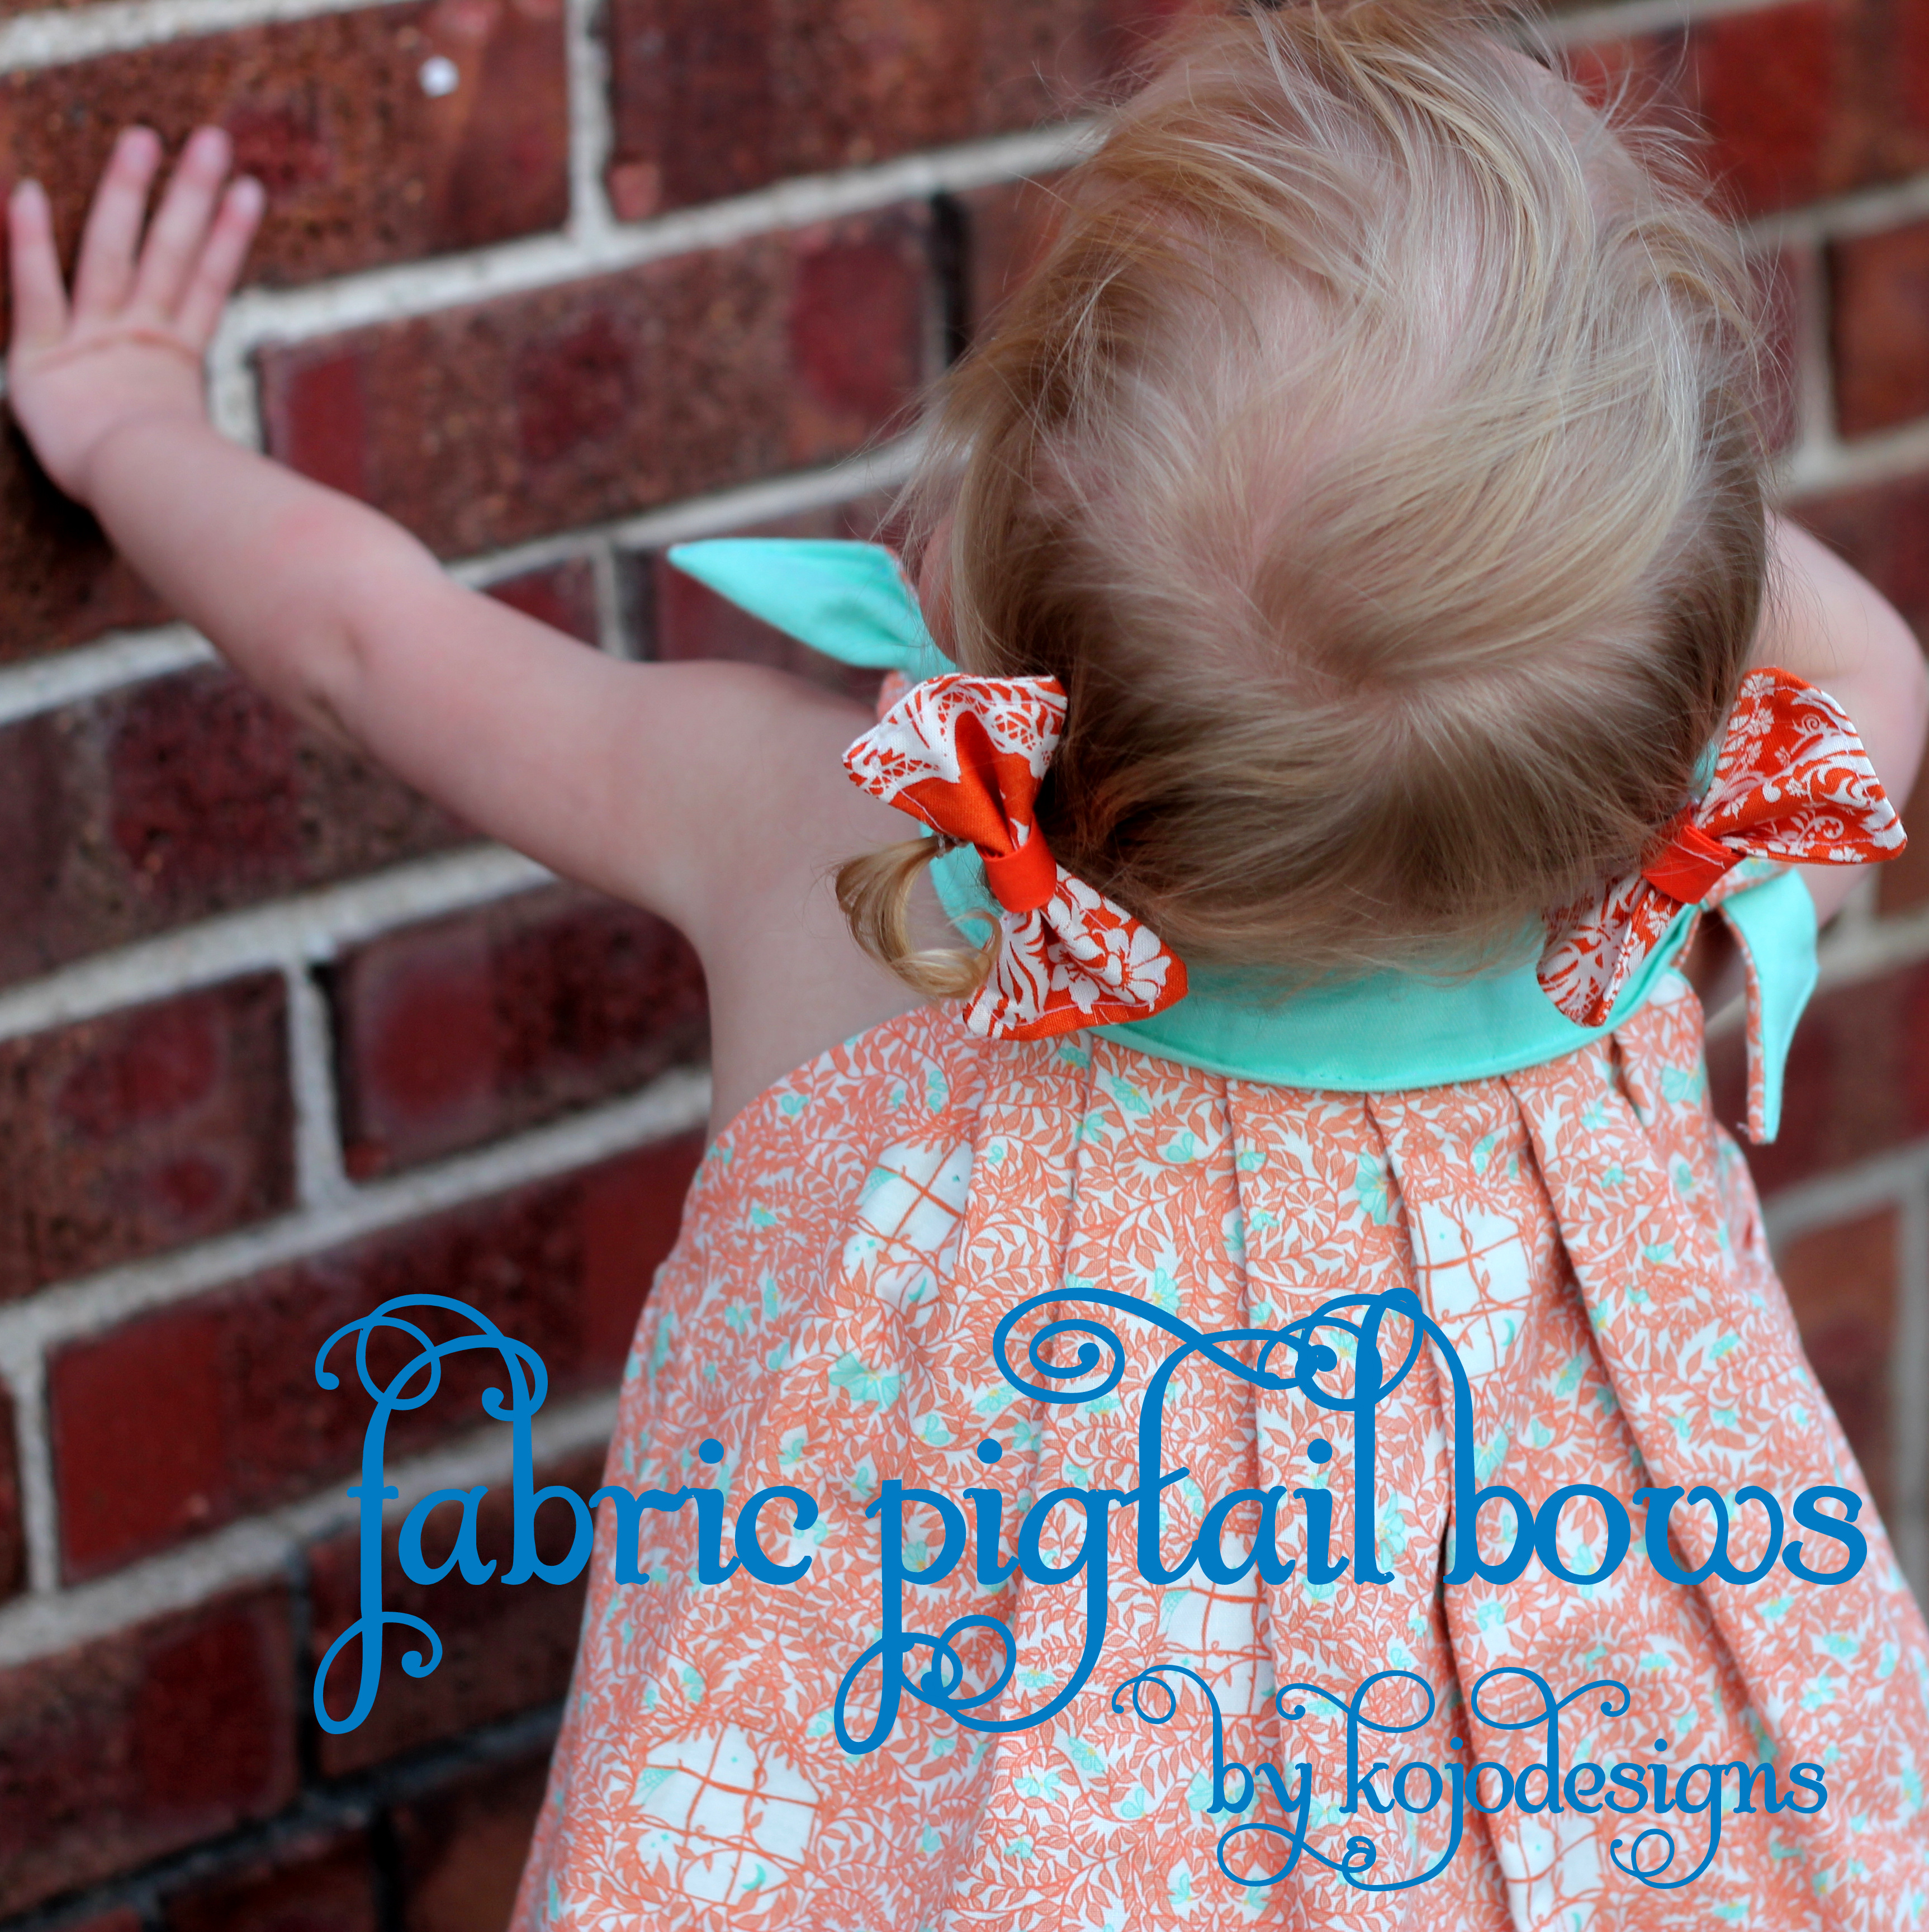 Pig tail Red Stripe Pig tail Bows Baby Girl pigtails for Christmas Pigtail Hair Bows Pigtail set Pigtail Bow Set